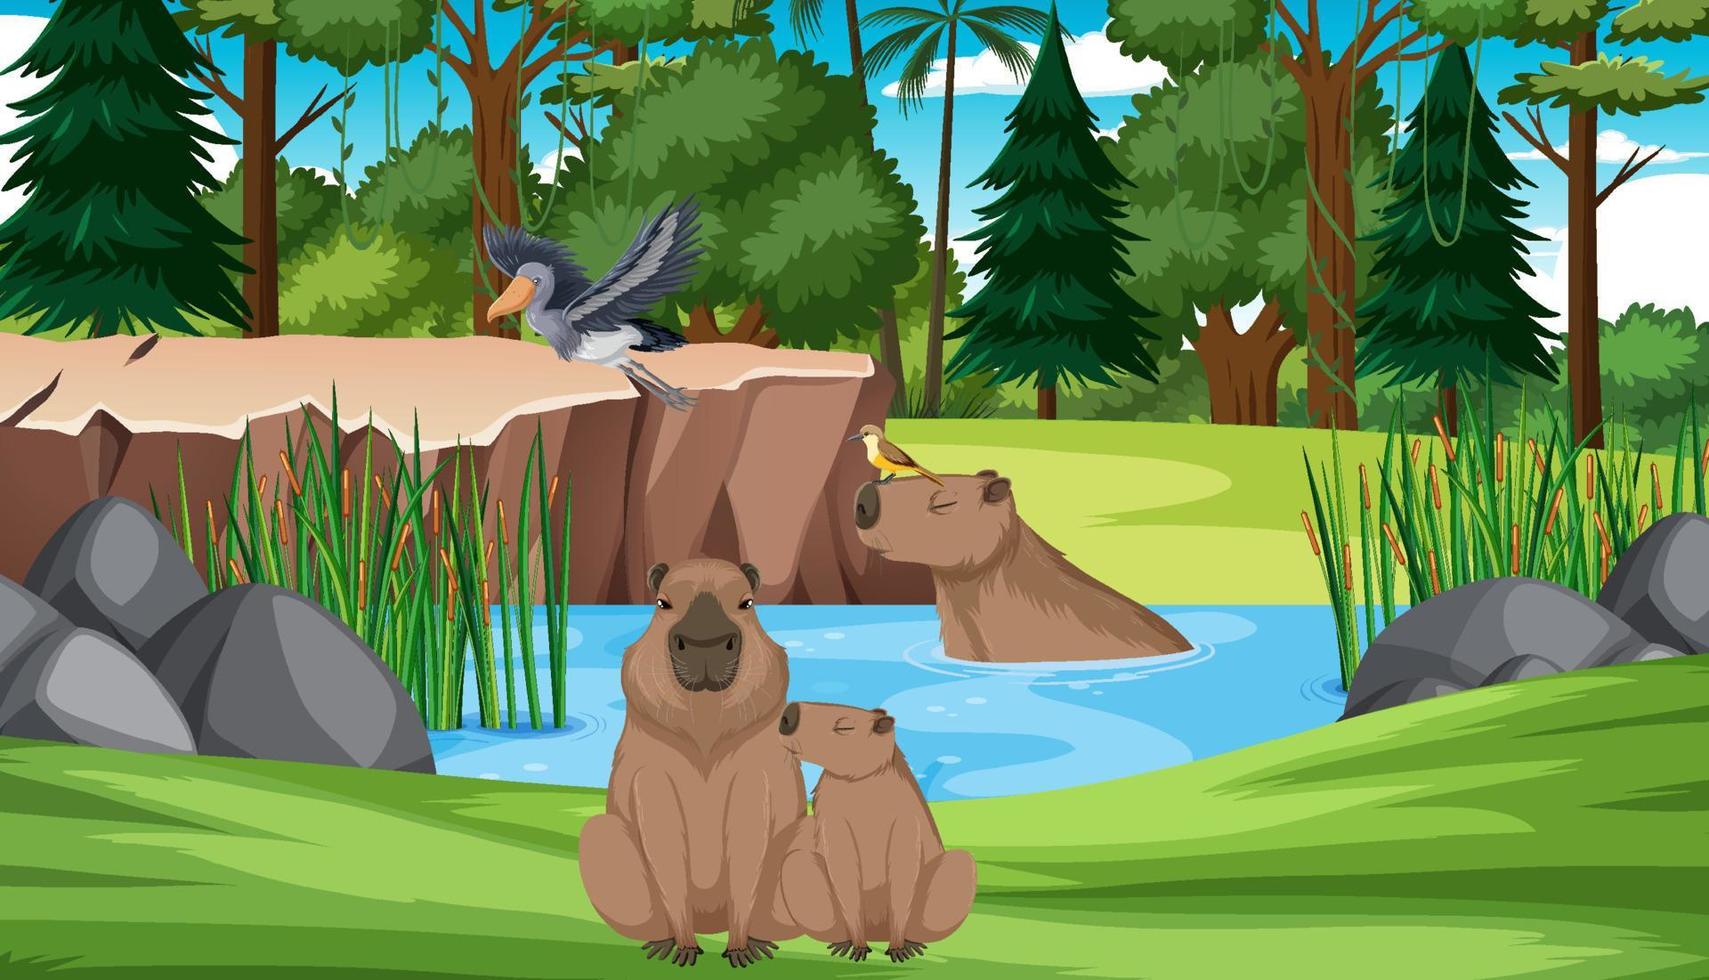 Wombats and birds by the pond vector